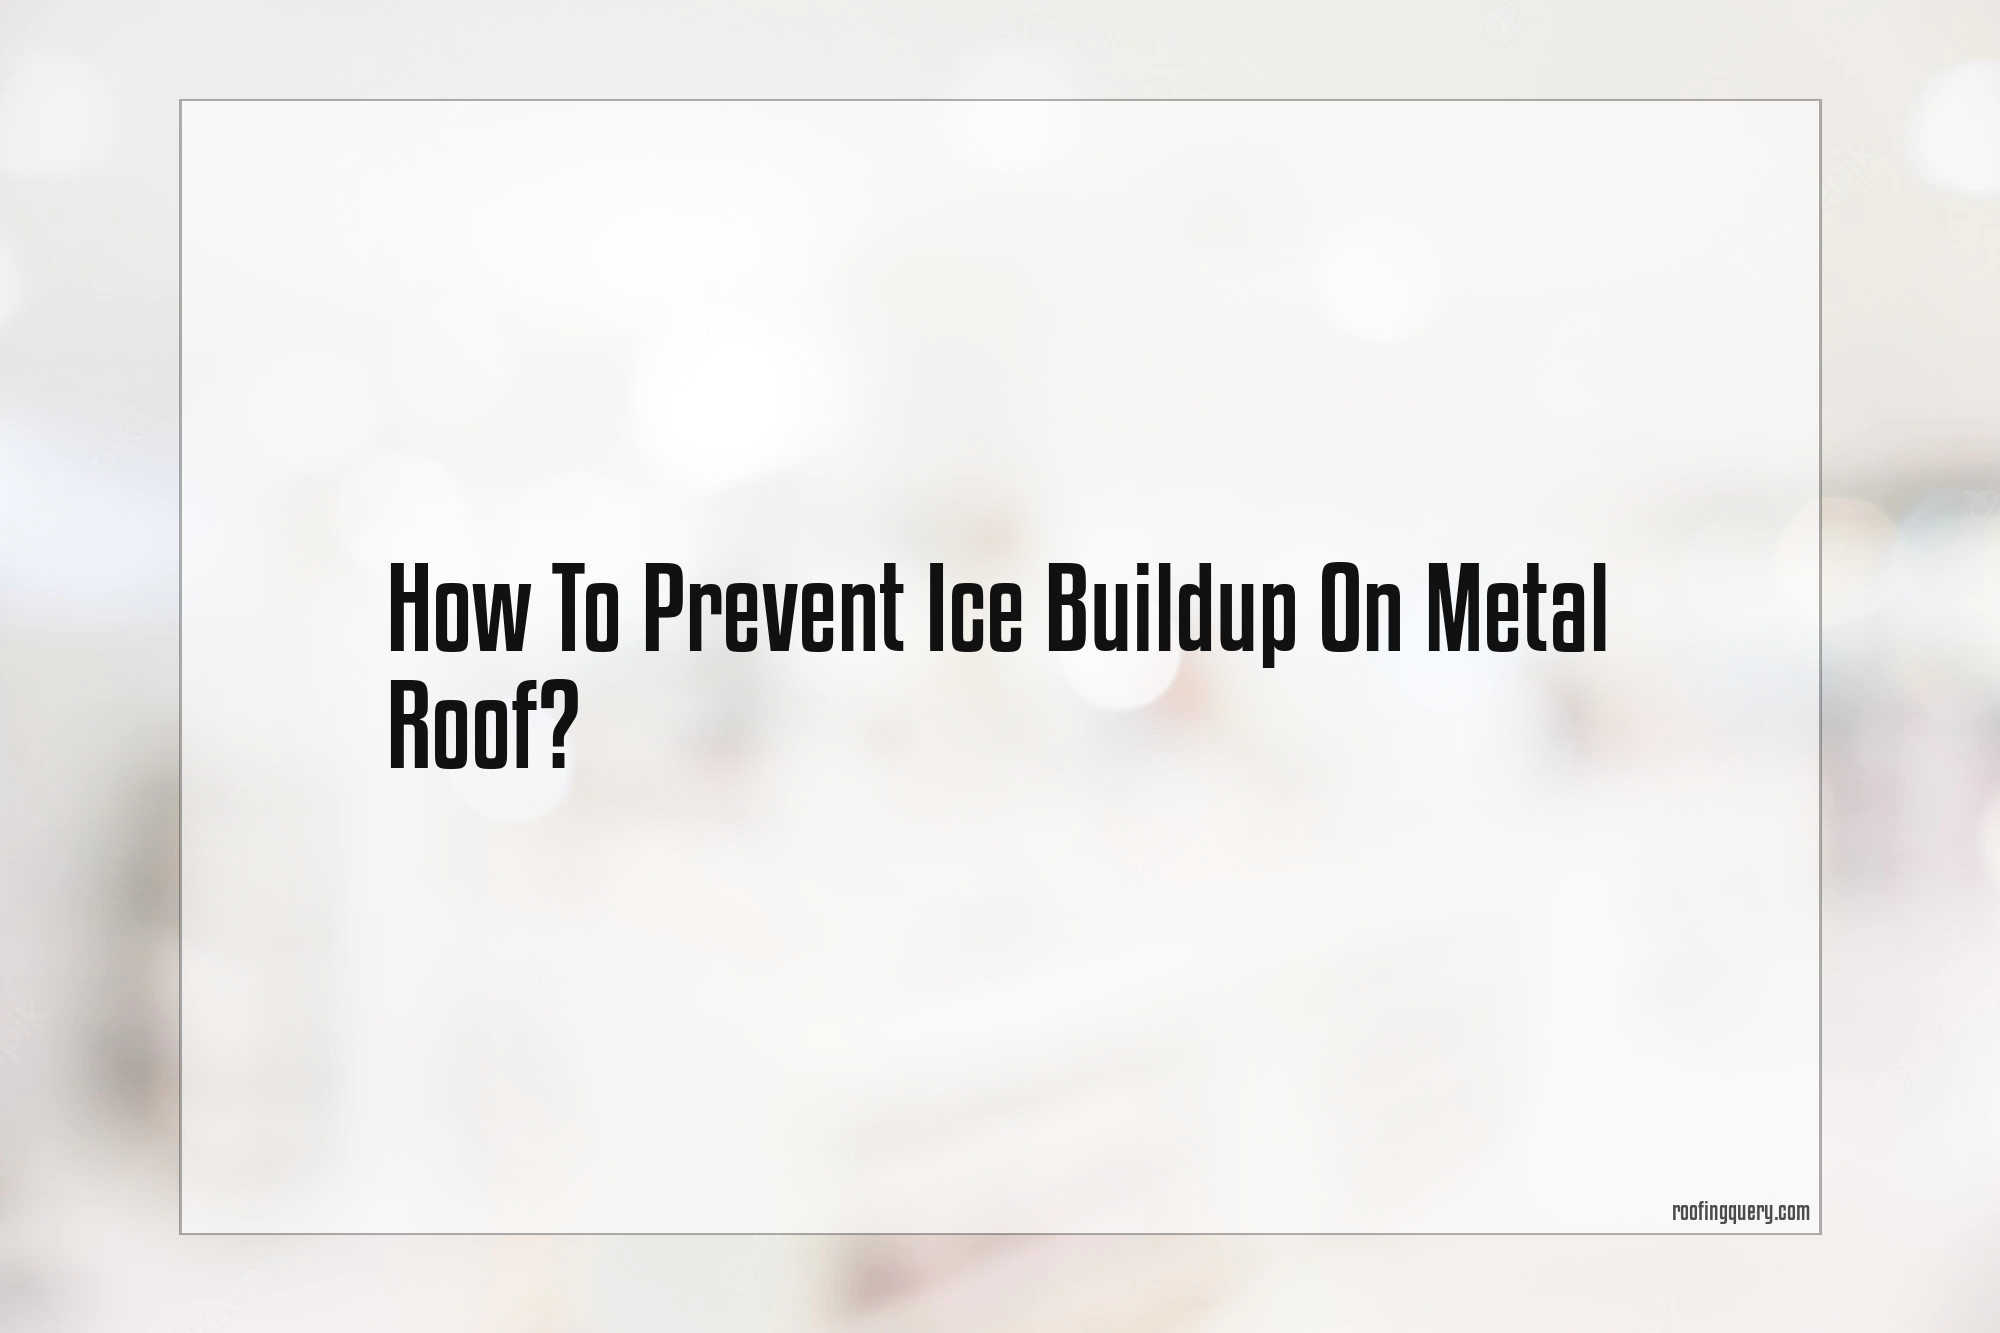 How To Prevent Ice Buildup On Metal Roof